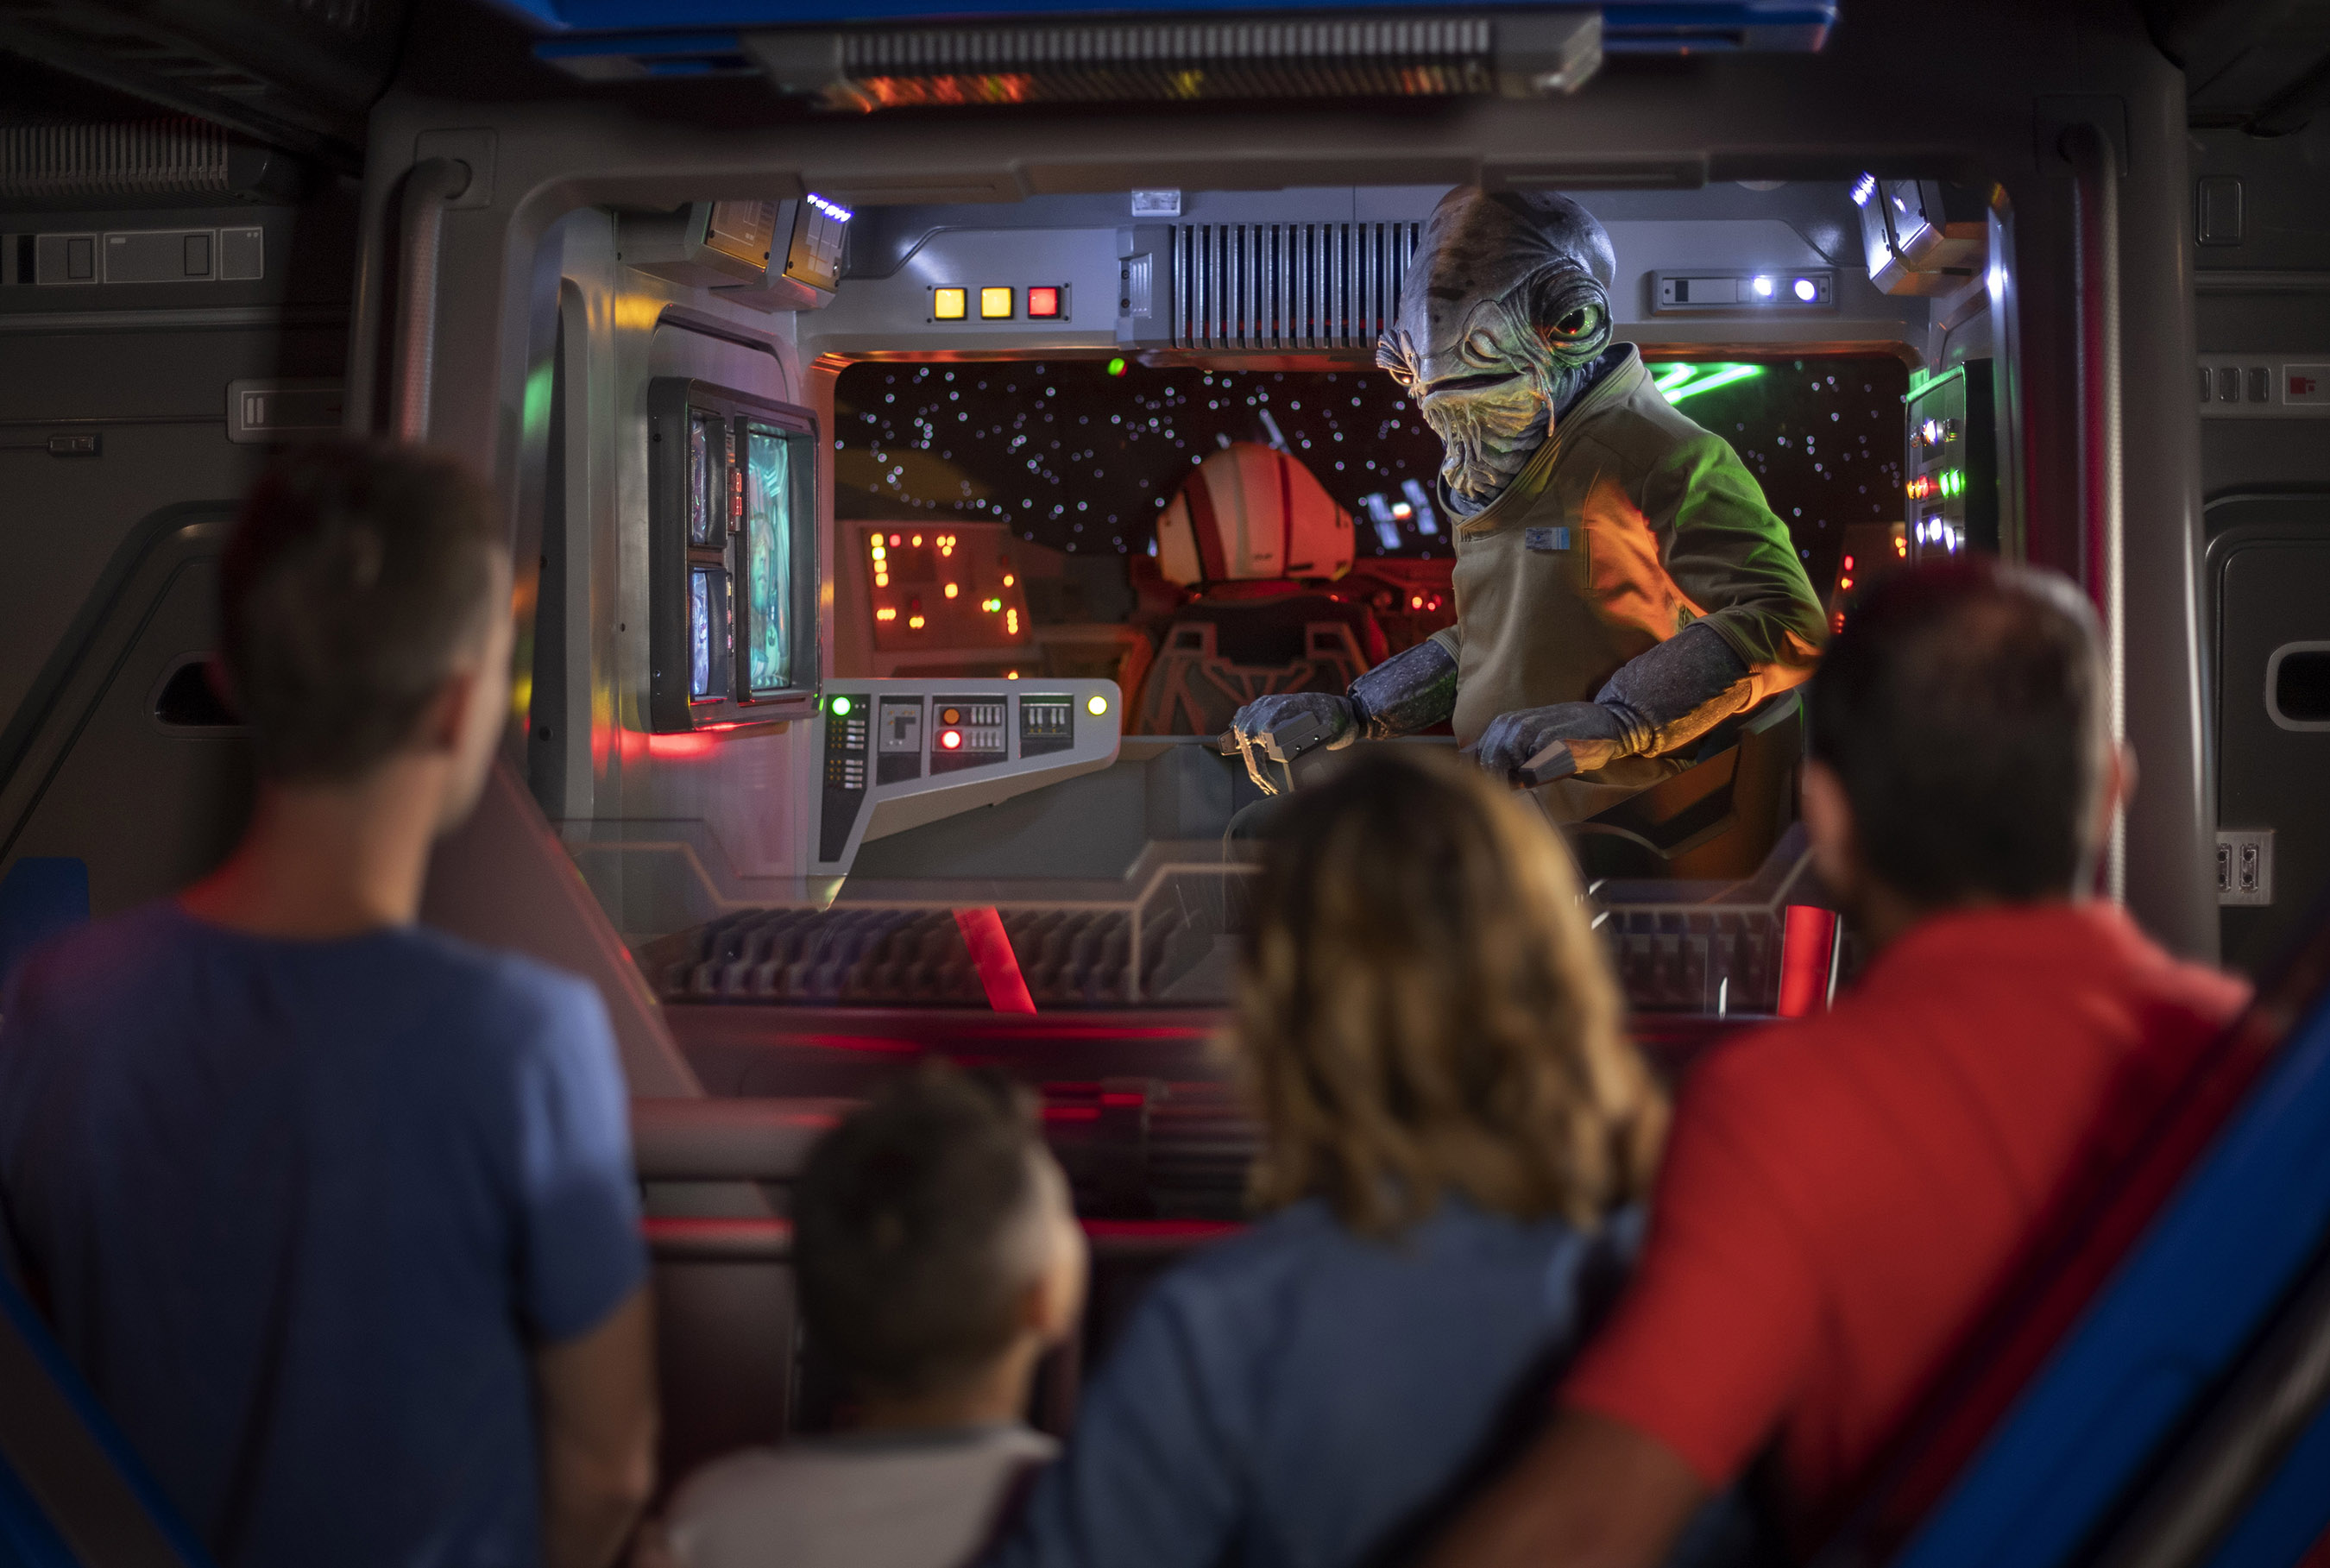 Inside the I-TS transport at Star Wars: Rise of the Resistance